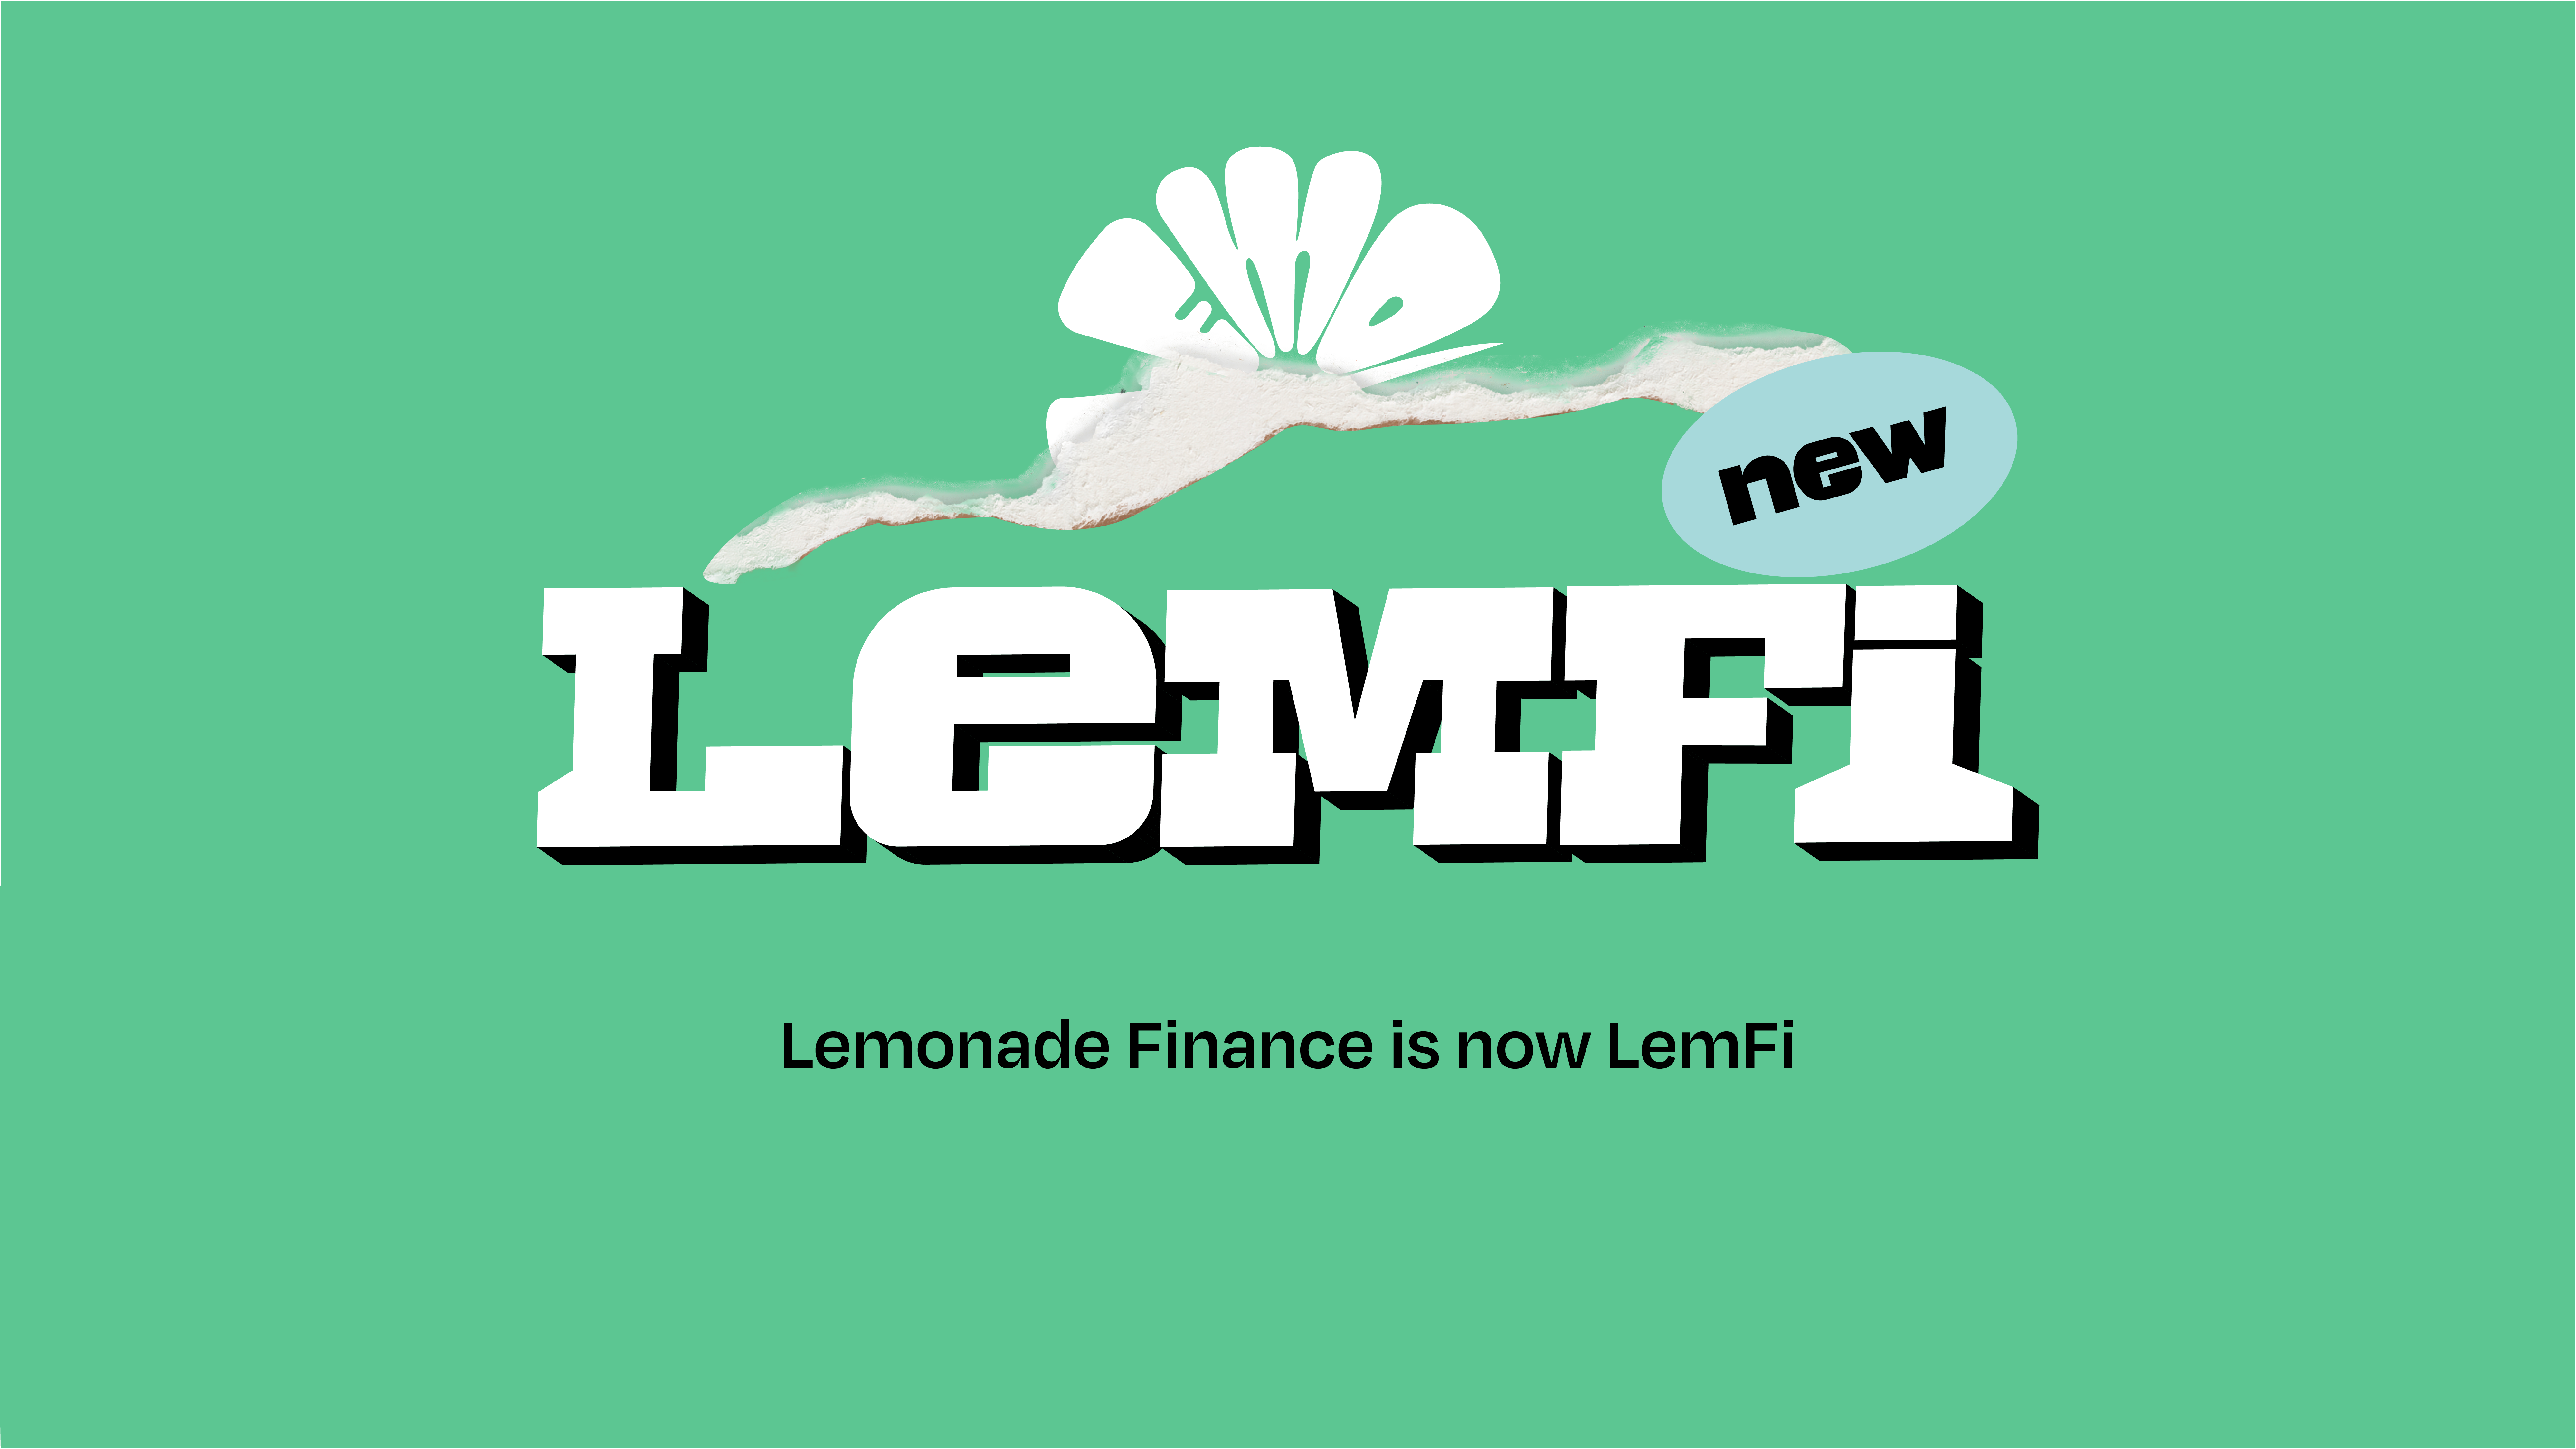 From Lemonade Finance to LemFi: International Payments for Everyone.